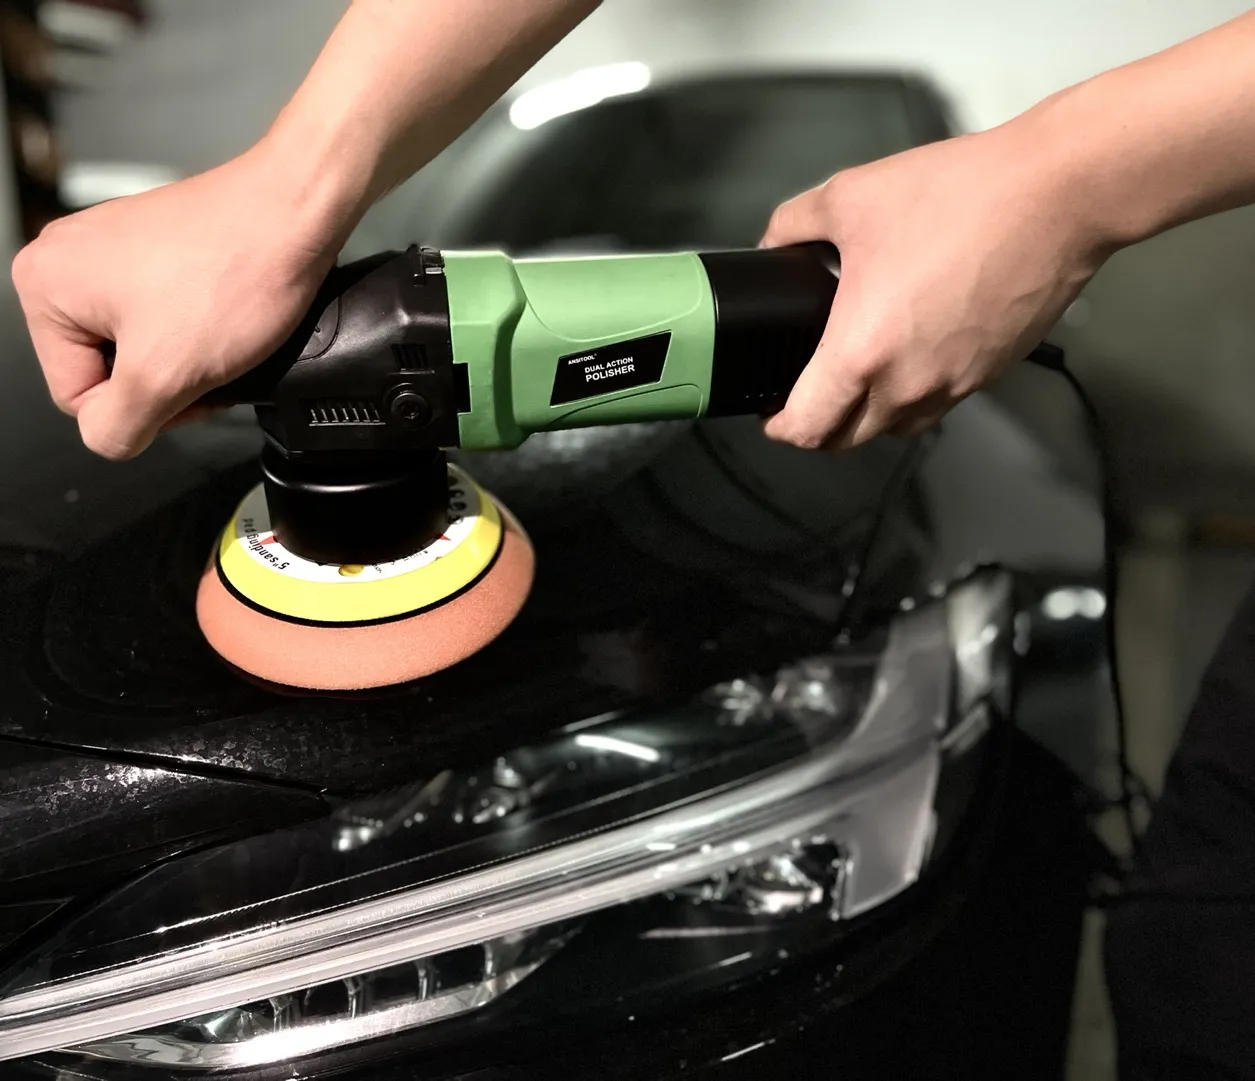 J0568 Dual Action Electric Customized Car Polisher